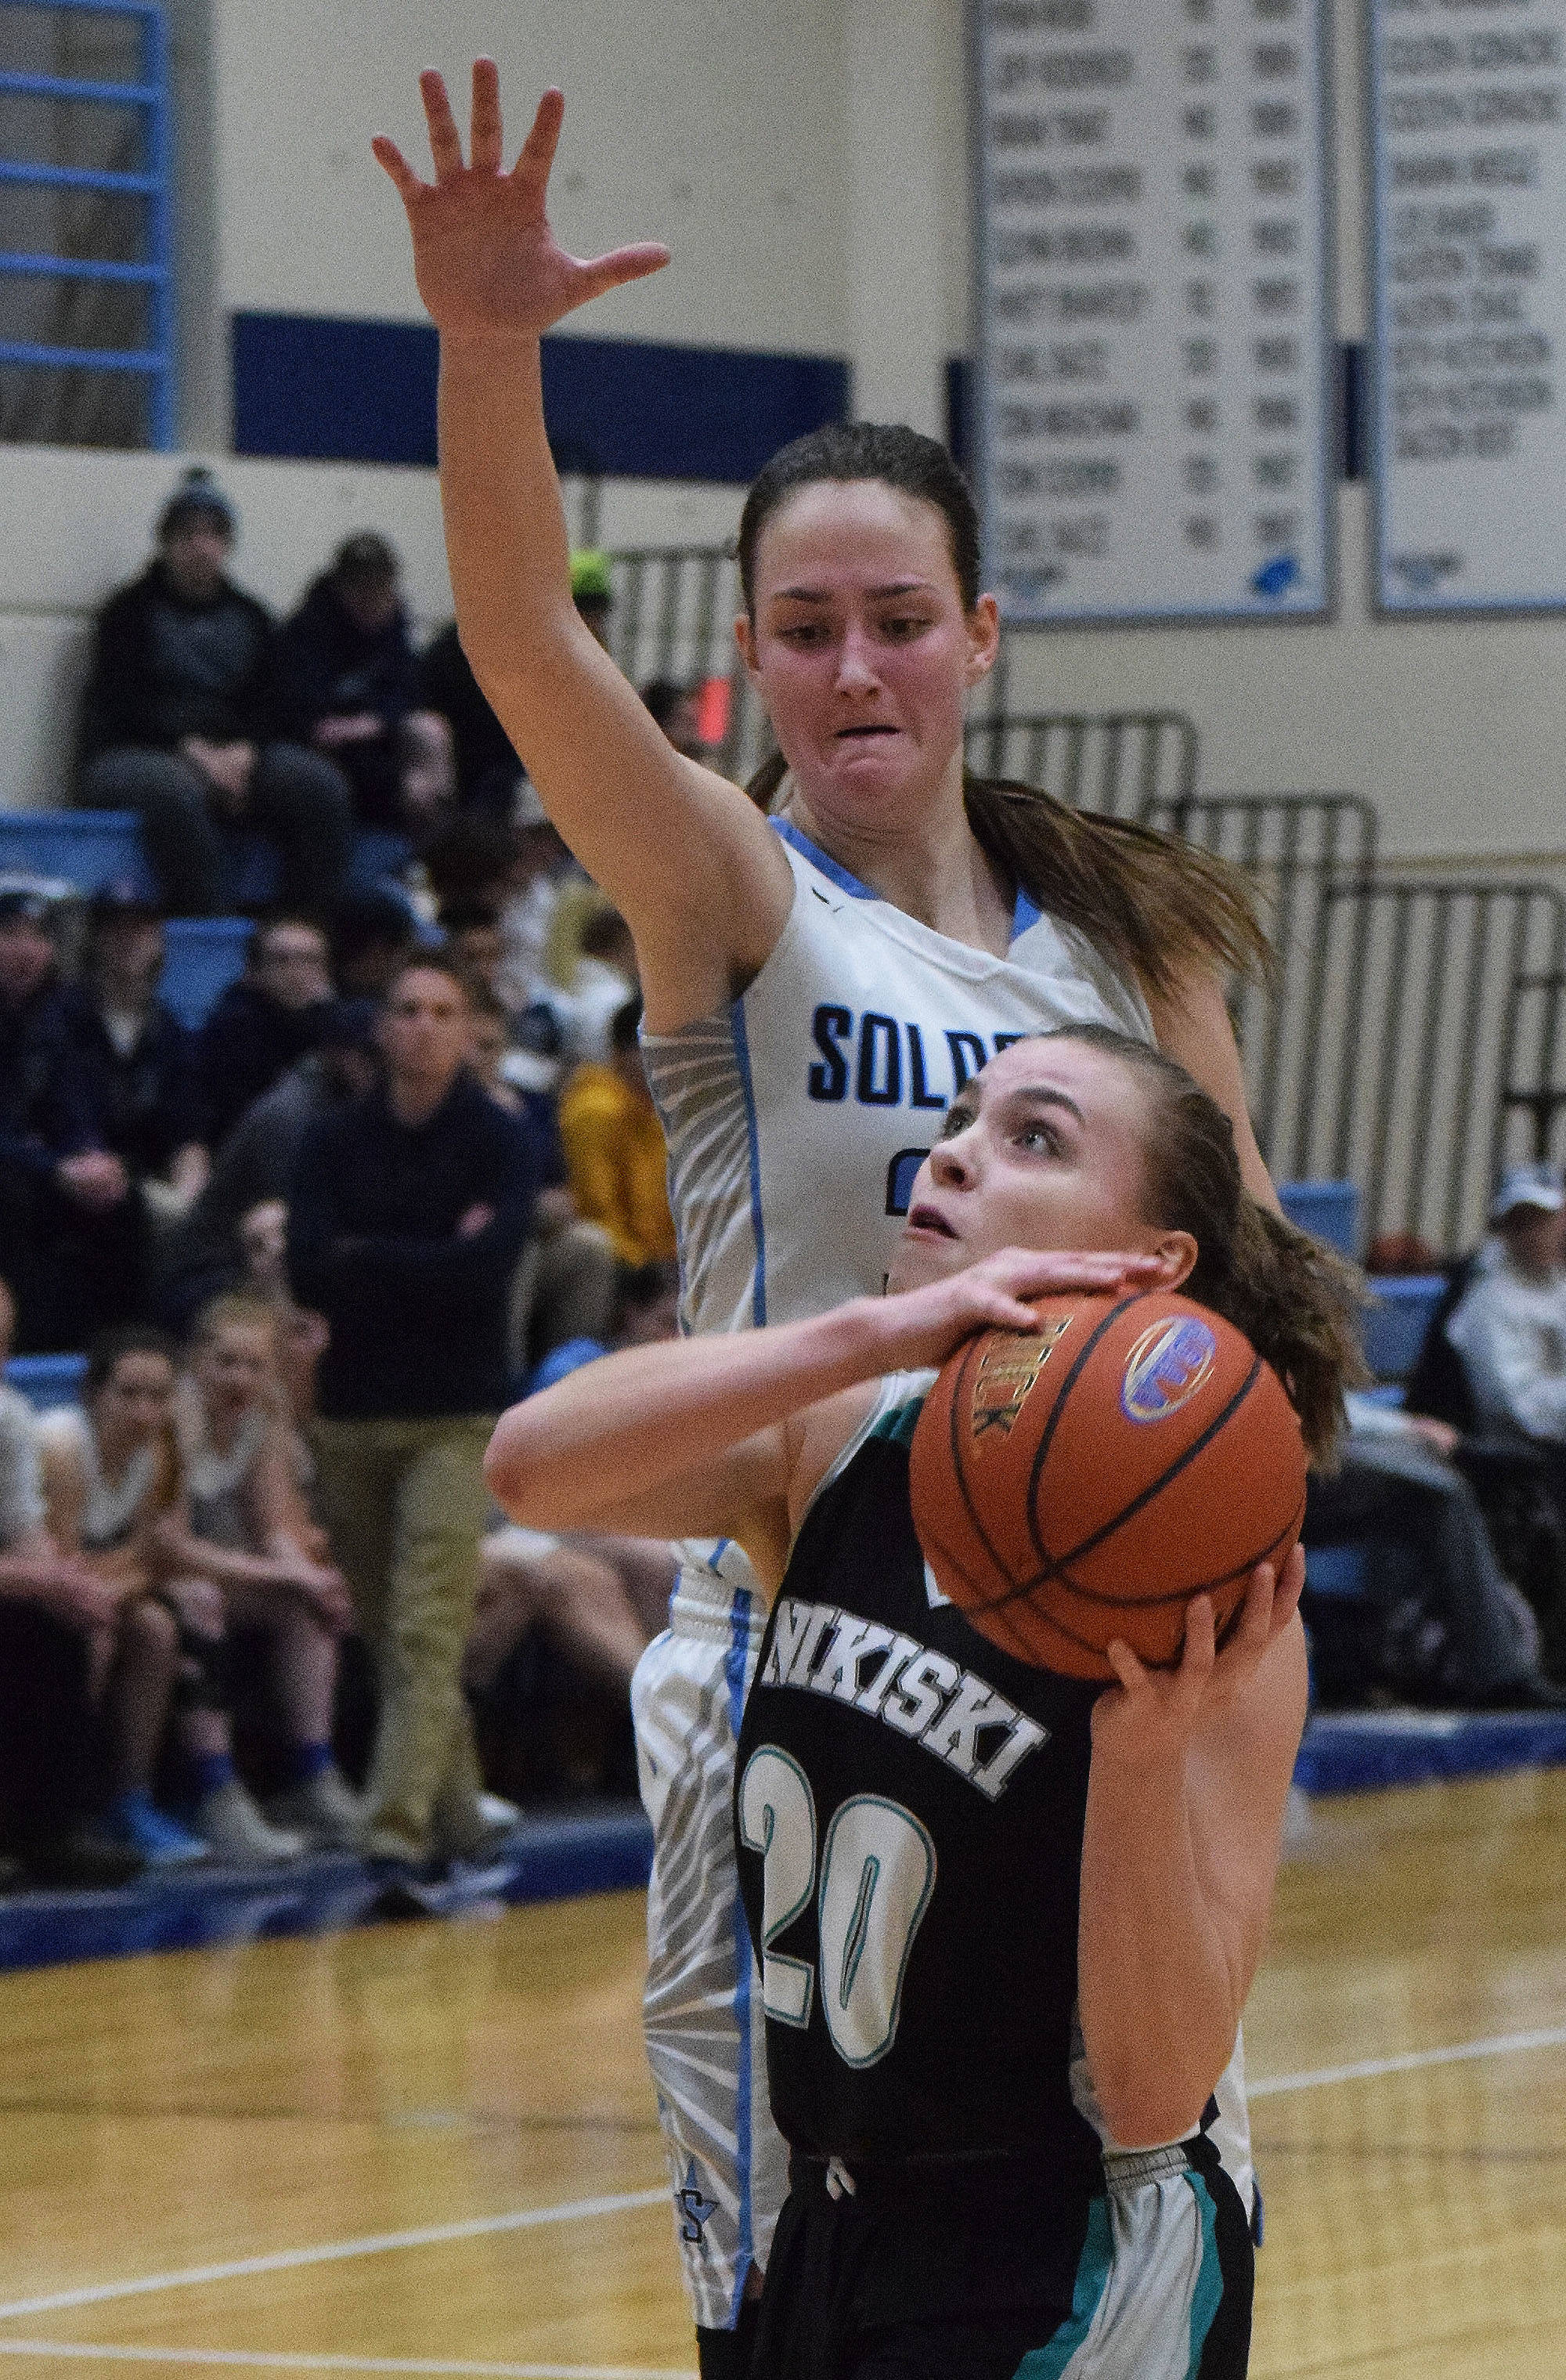 Soldotna’s Danica Schmidt (top) puts up a block on Nikiski’s Bethany Carstens Tuesday night in a nonconference game at Soldotna High School. (Photo by Joey Klecka/Peninsula Carion)